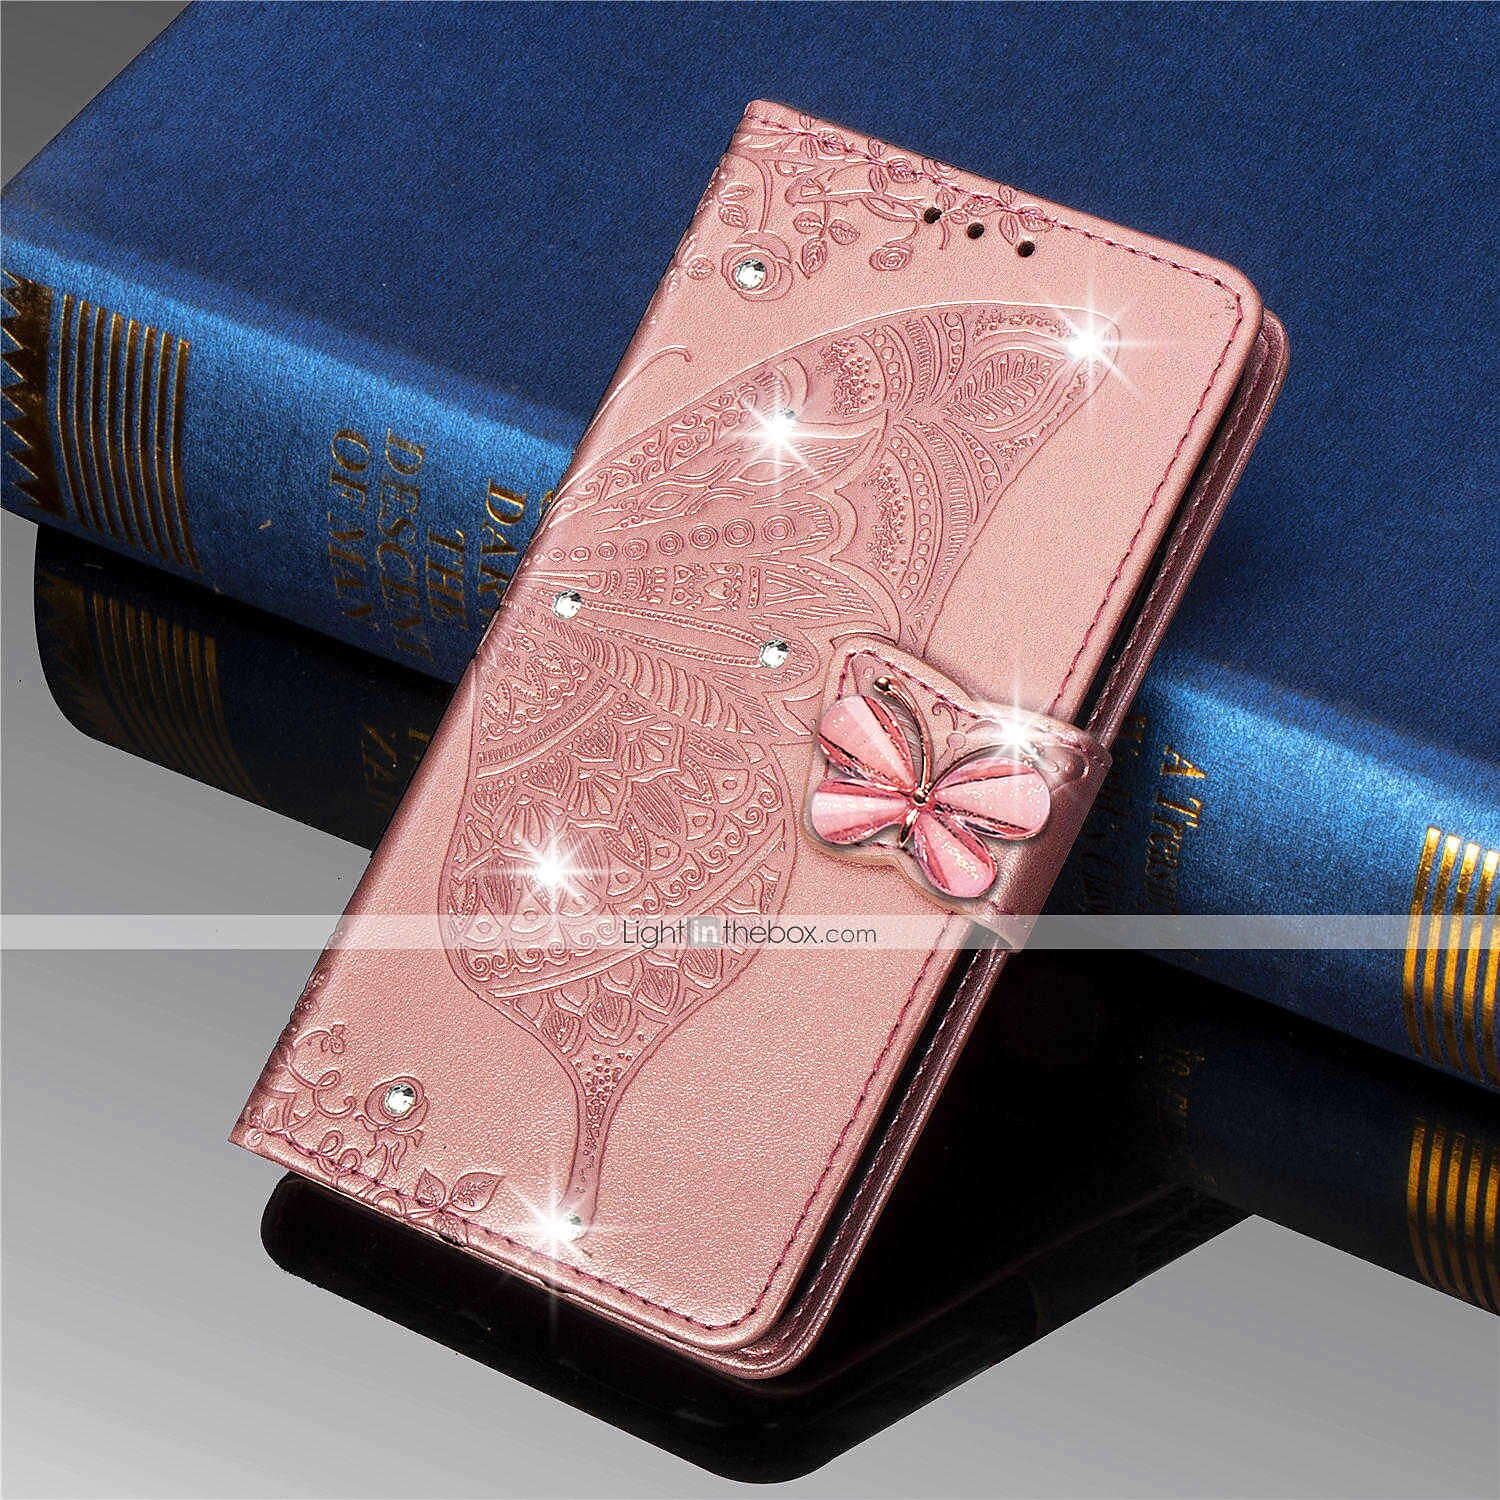 Diamond Buckle Card Slots PU Leather 3D Shockproof Bling Glitter Samsung Galaxy A20e Case Magnetic Closure Wallet Cover Notebook Soft TPU Bumper Protective Cover Skin for Girls Women Blue 